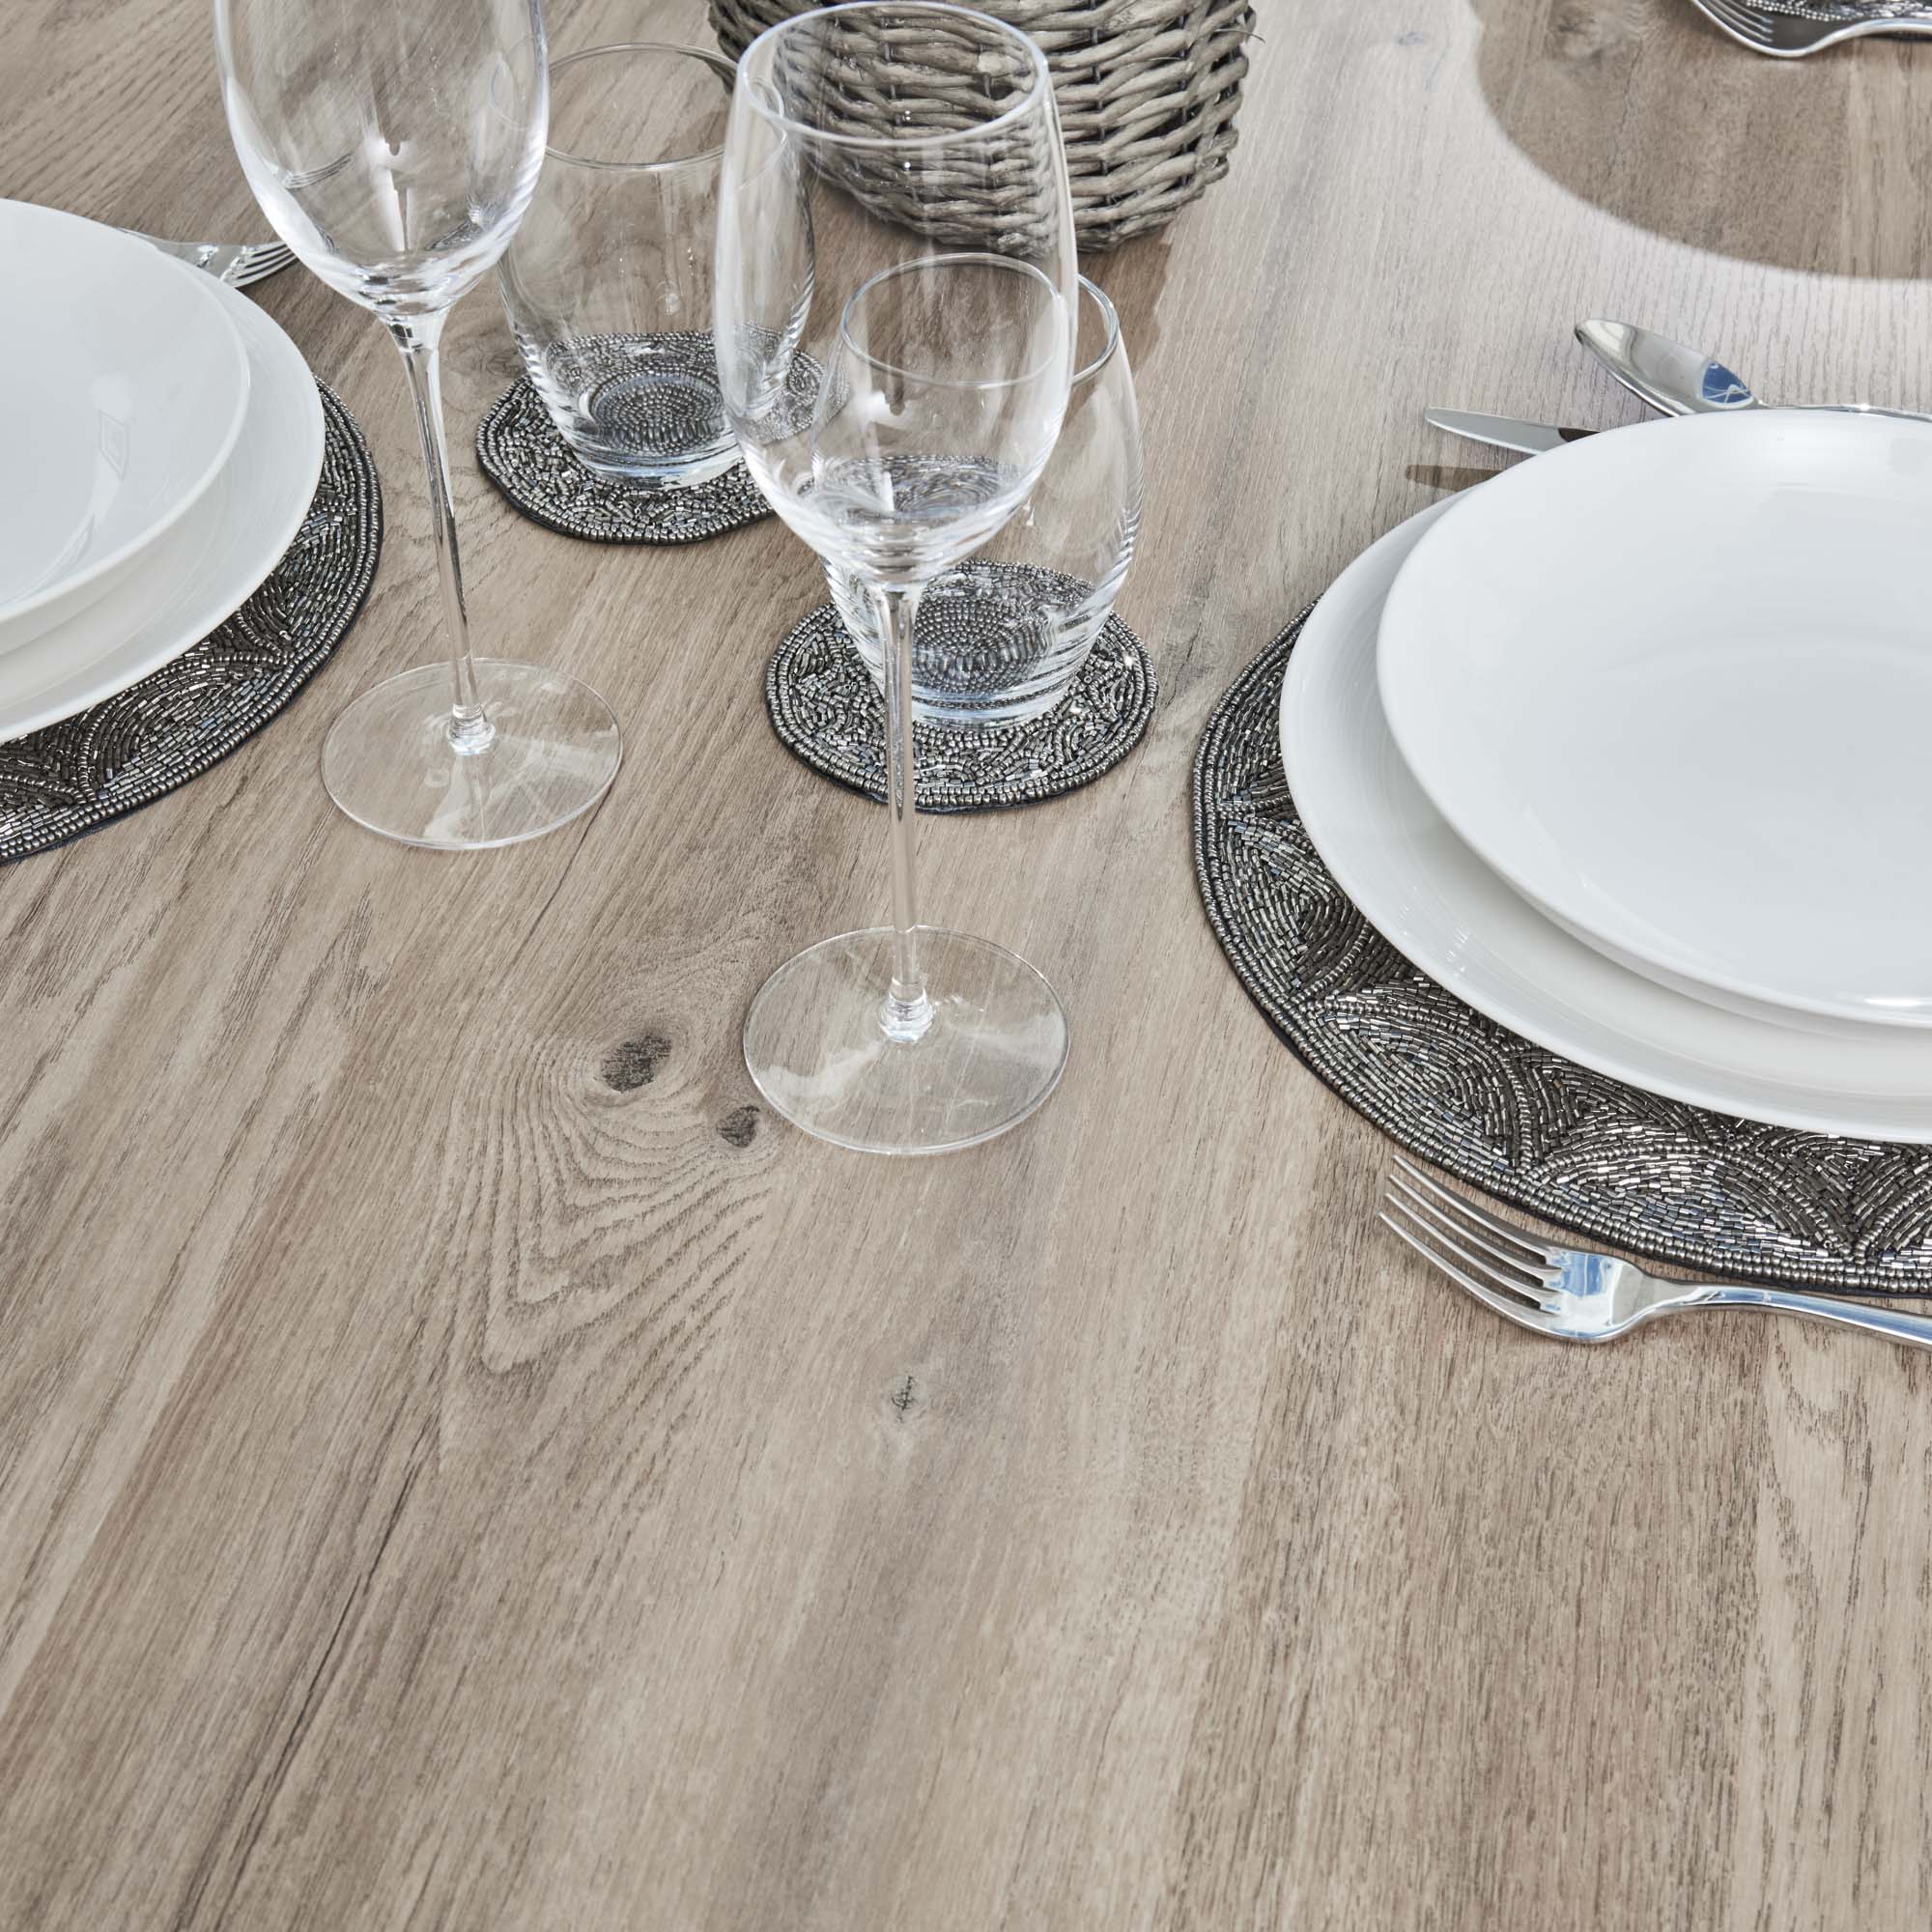 Bellagio 90cm Square Natural Oak Melamine Dining Table Set with 4x Camila Grey/Tan Dining Chairs